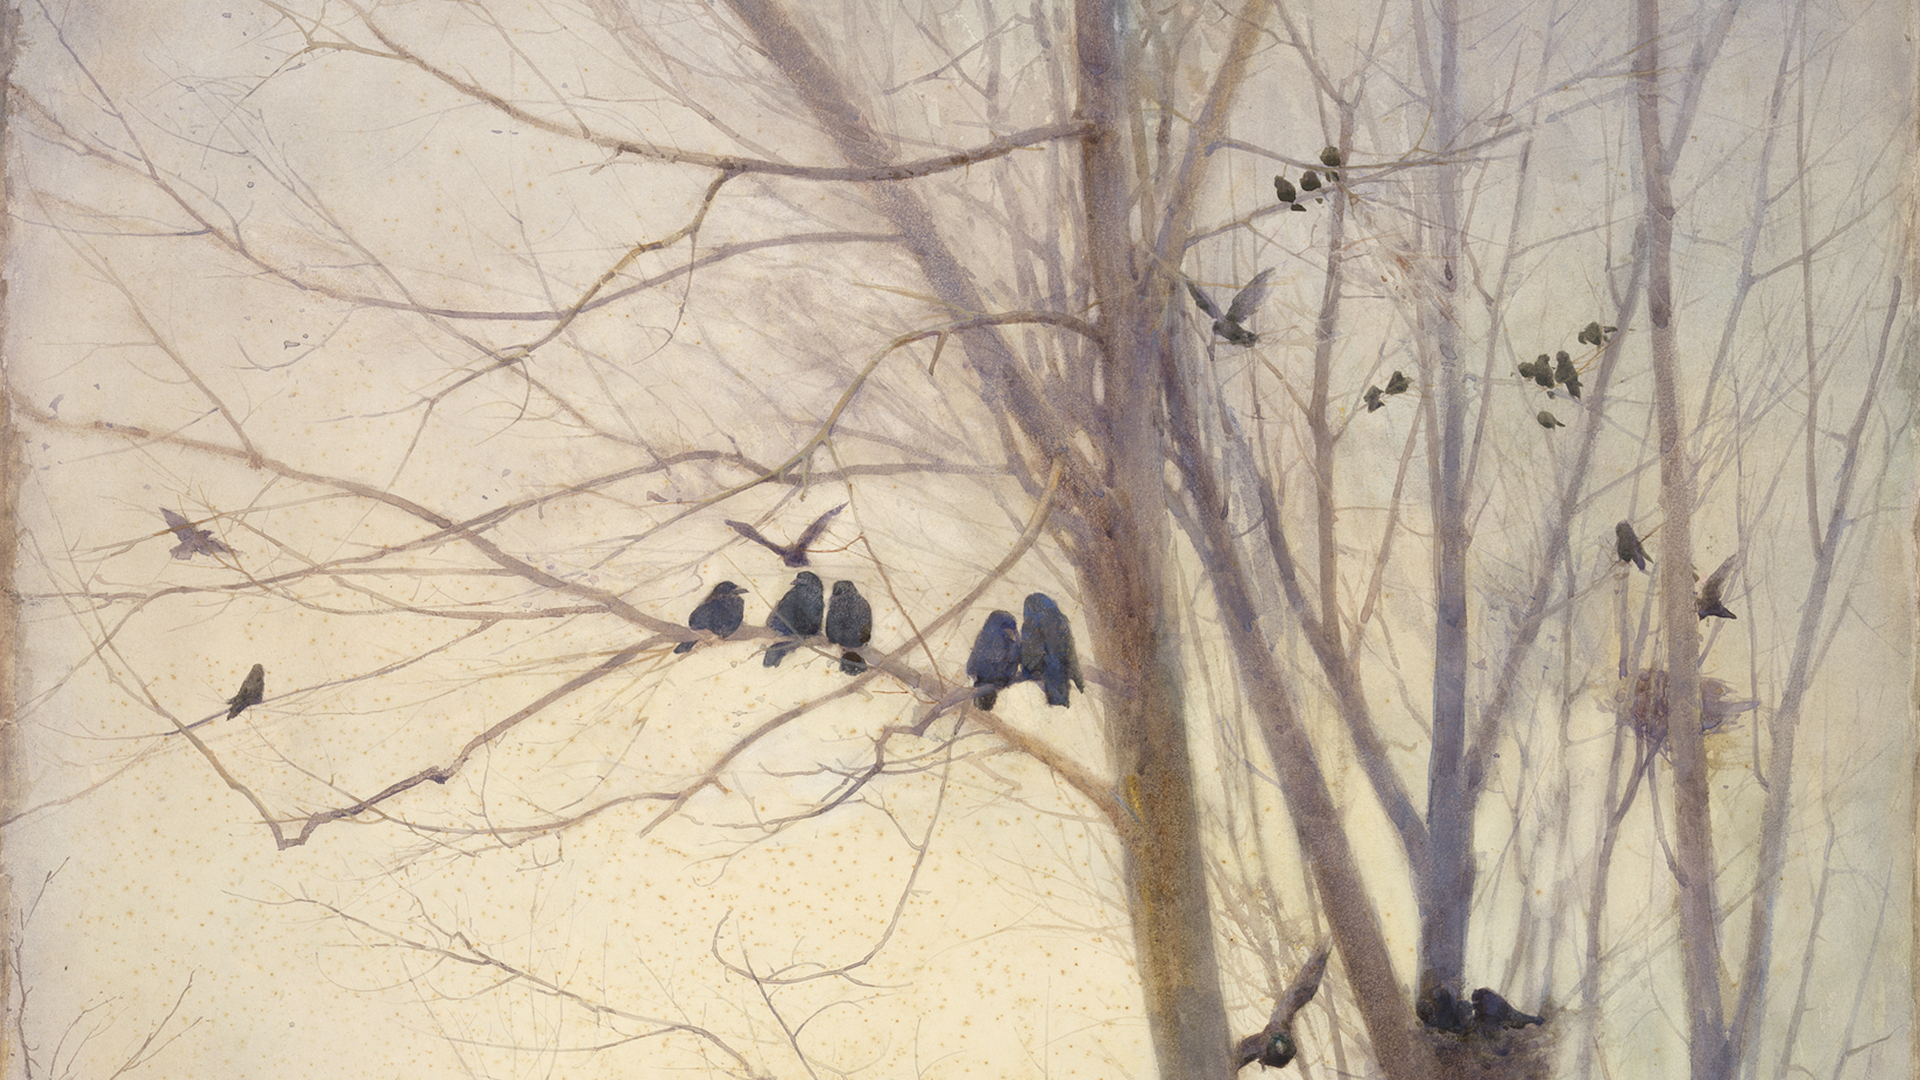 Muted painting of crows perched on bare branches of a tree in winter